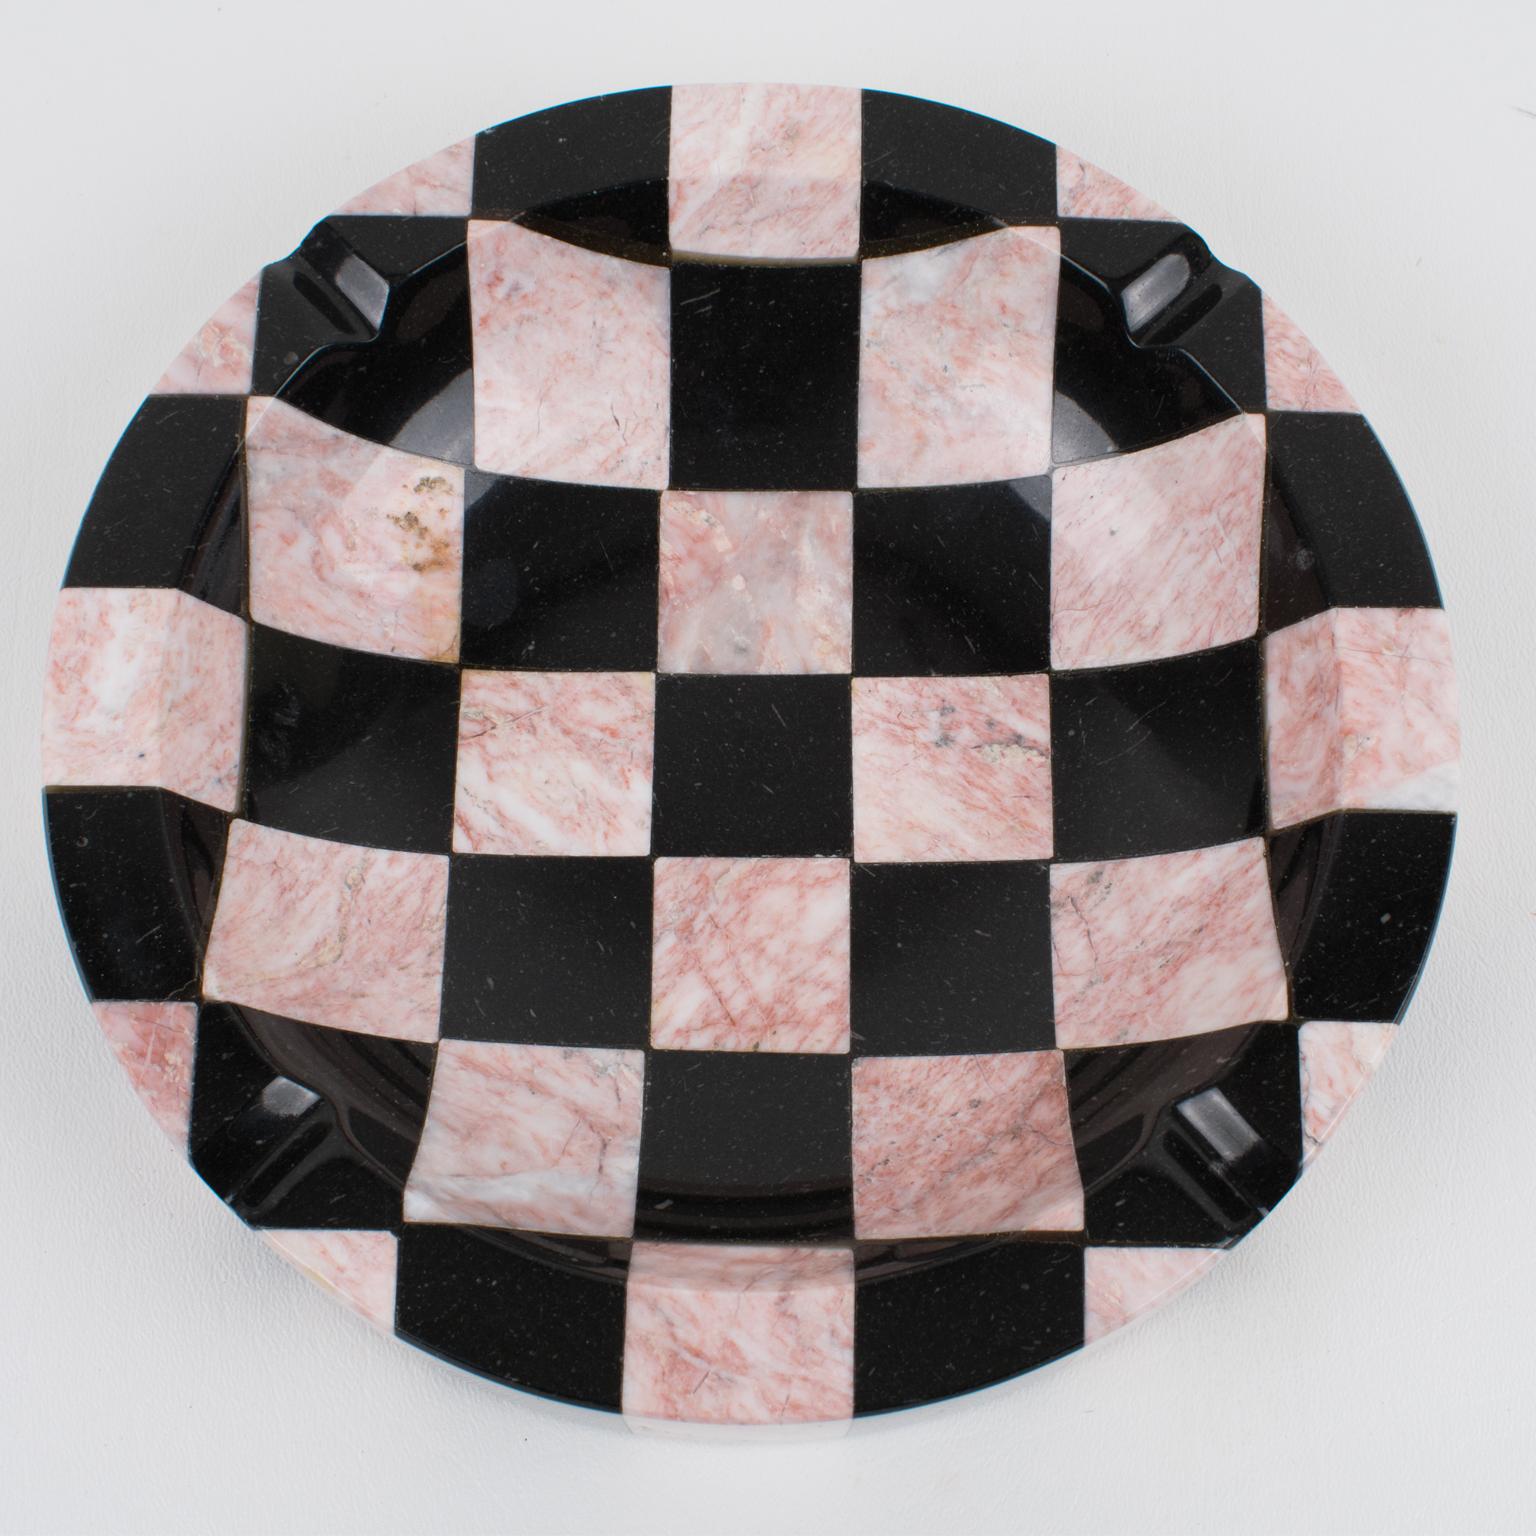 Late 20th Century 1970s Black and Pink Marble Cigar Ashtray Desk Tidy Catchall